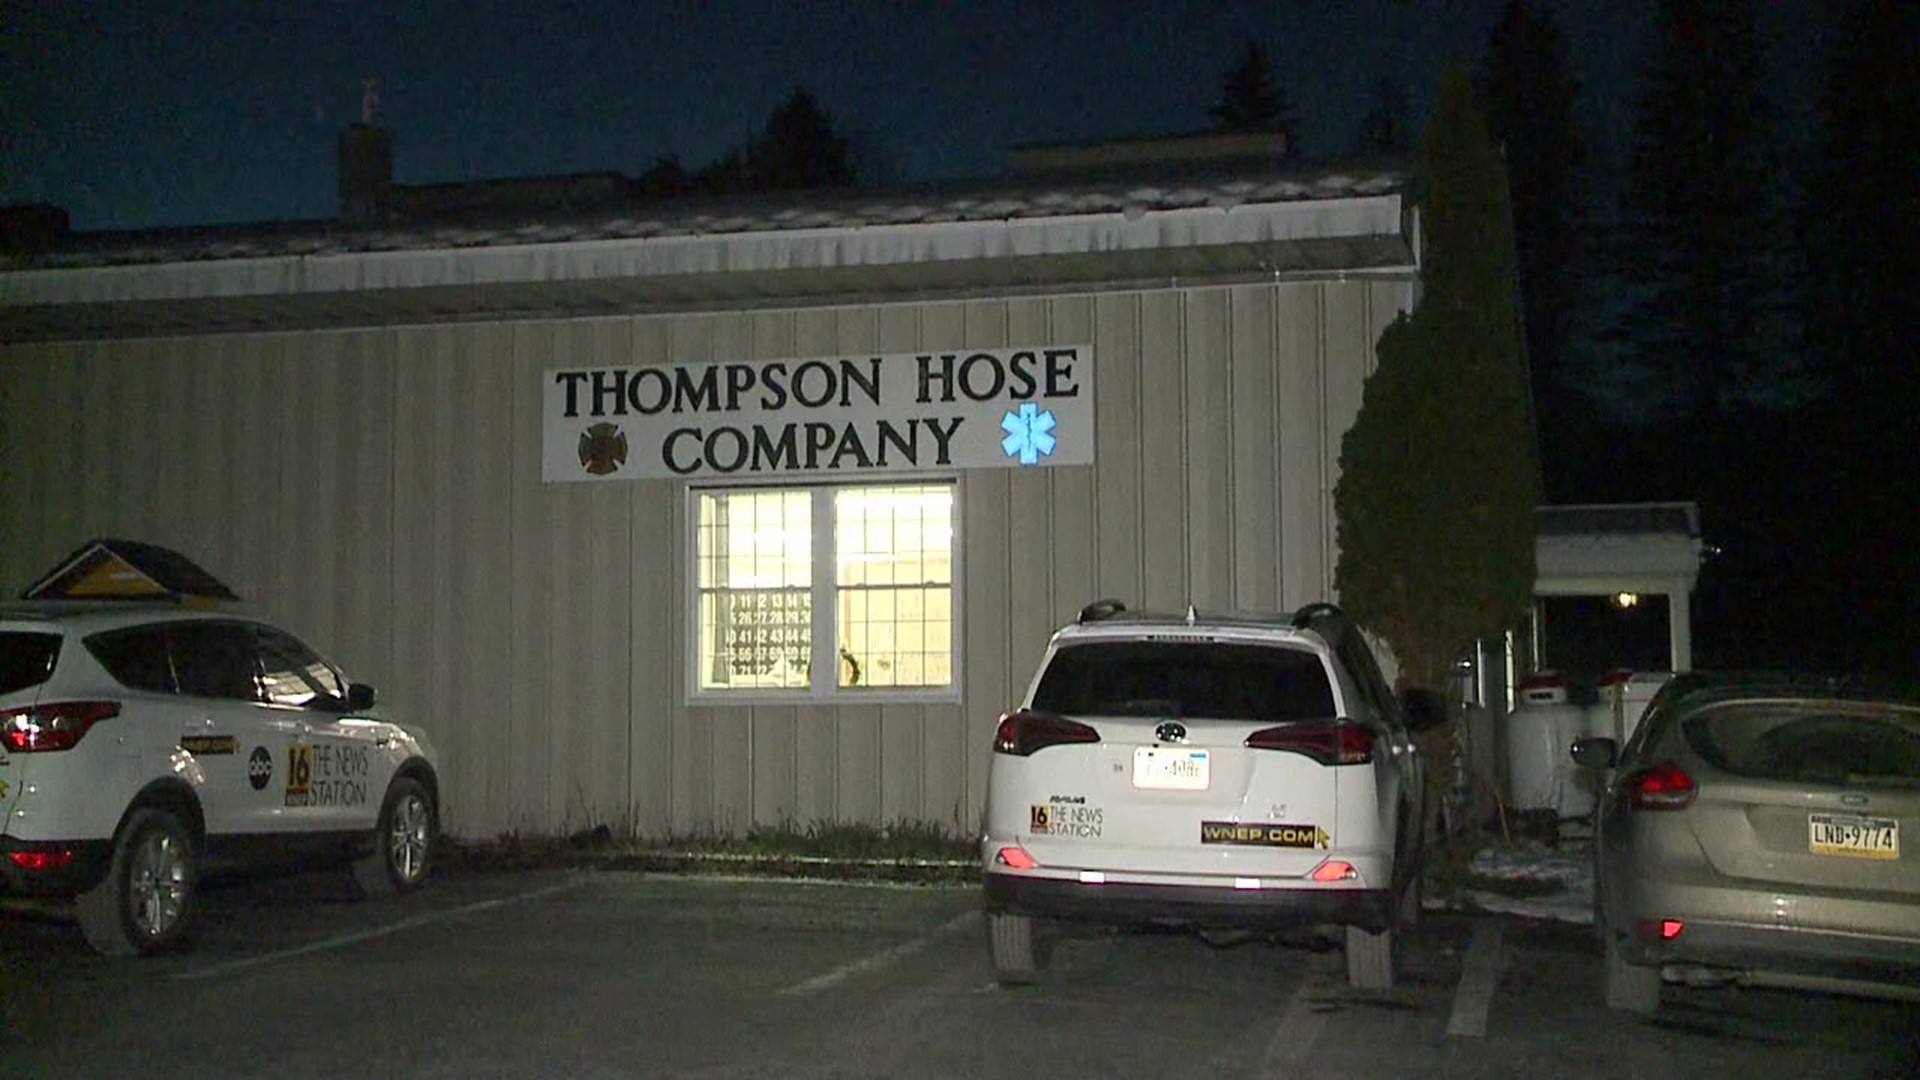 The Thompson Fire Hose Company has been transformed into an overnight warming shelter for those still without power.